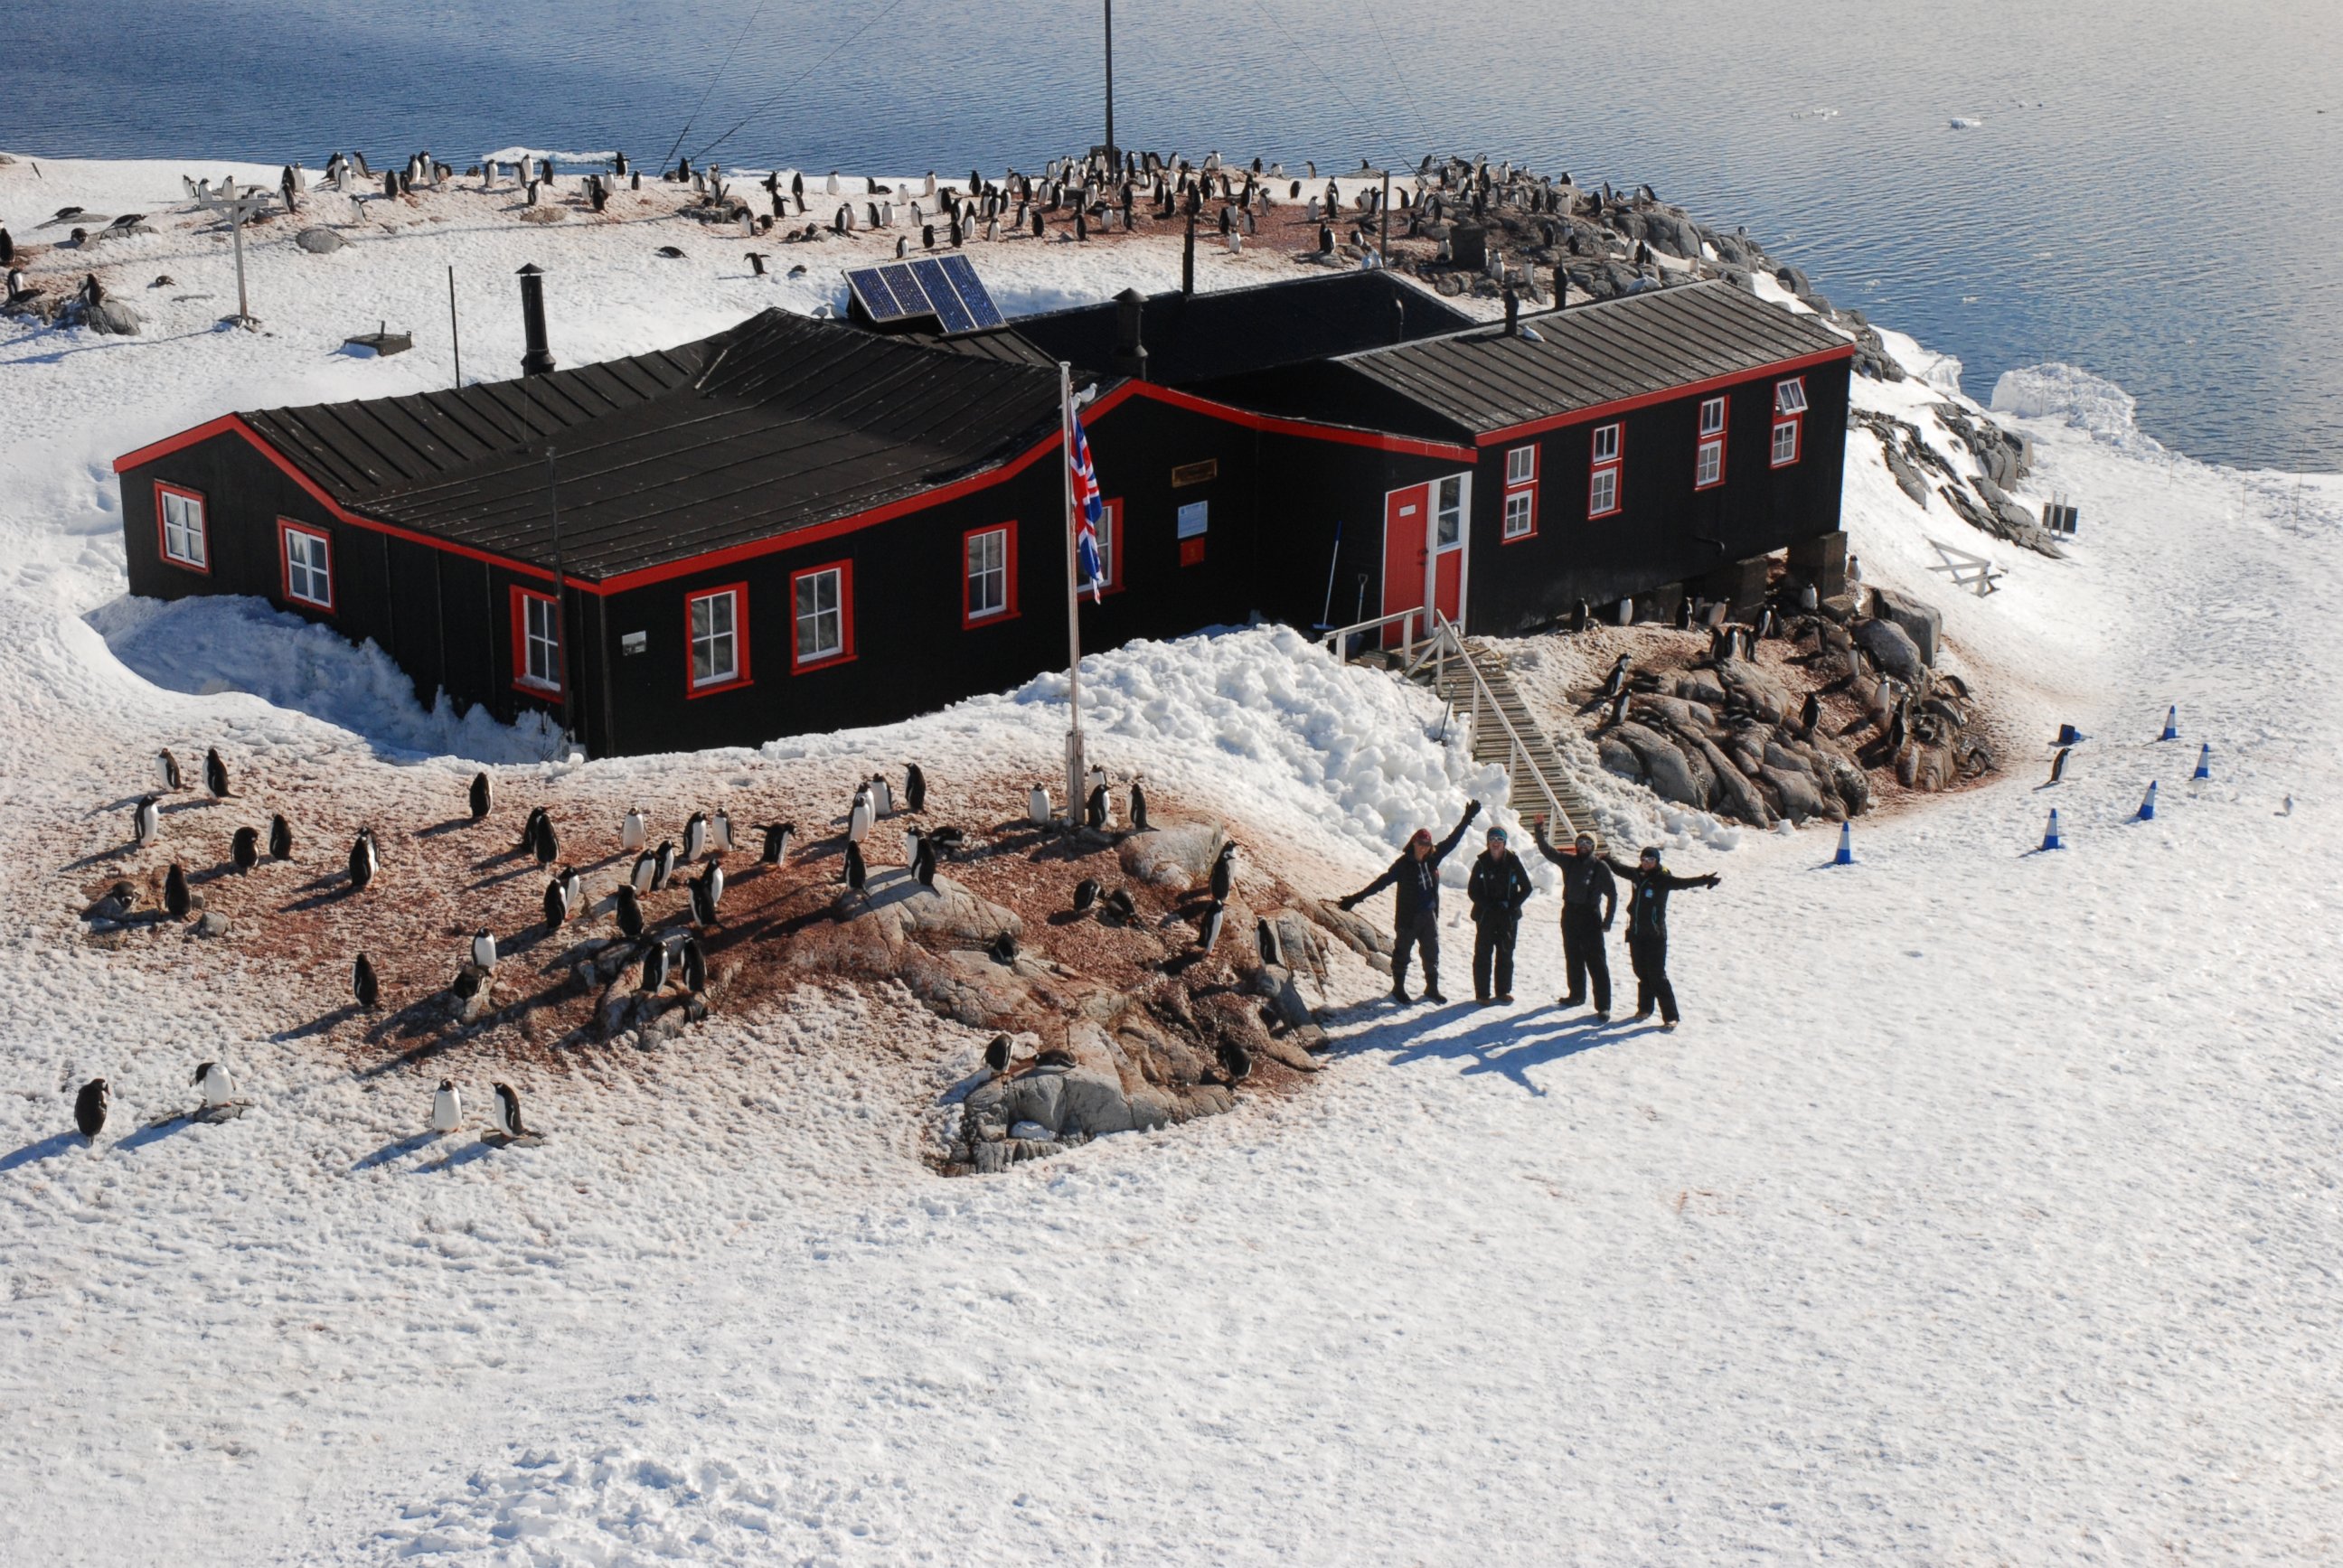 PHOTO: The team at Port Lockroy, situated on Goudier Island in the Antarctic Peninsula.